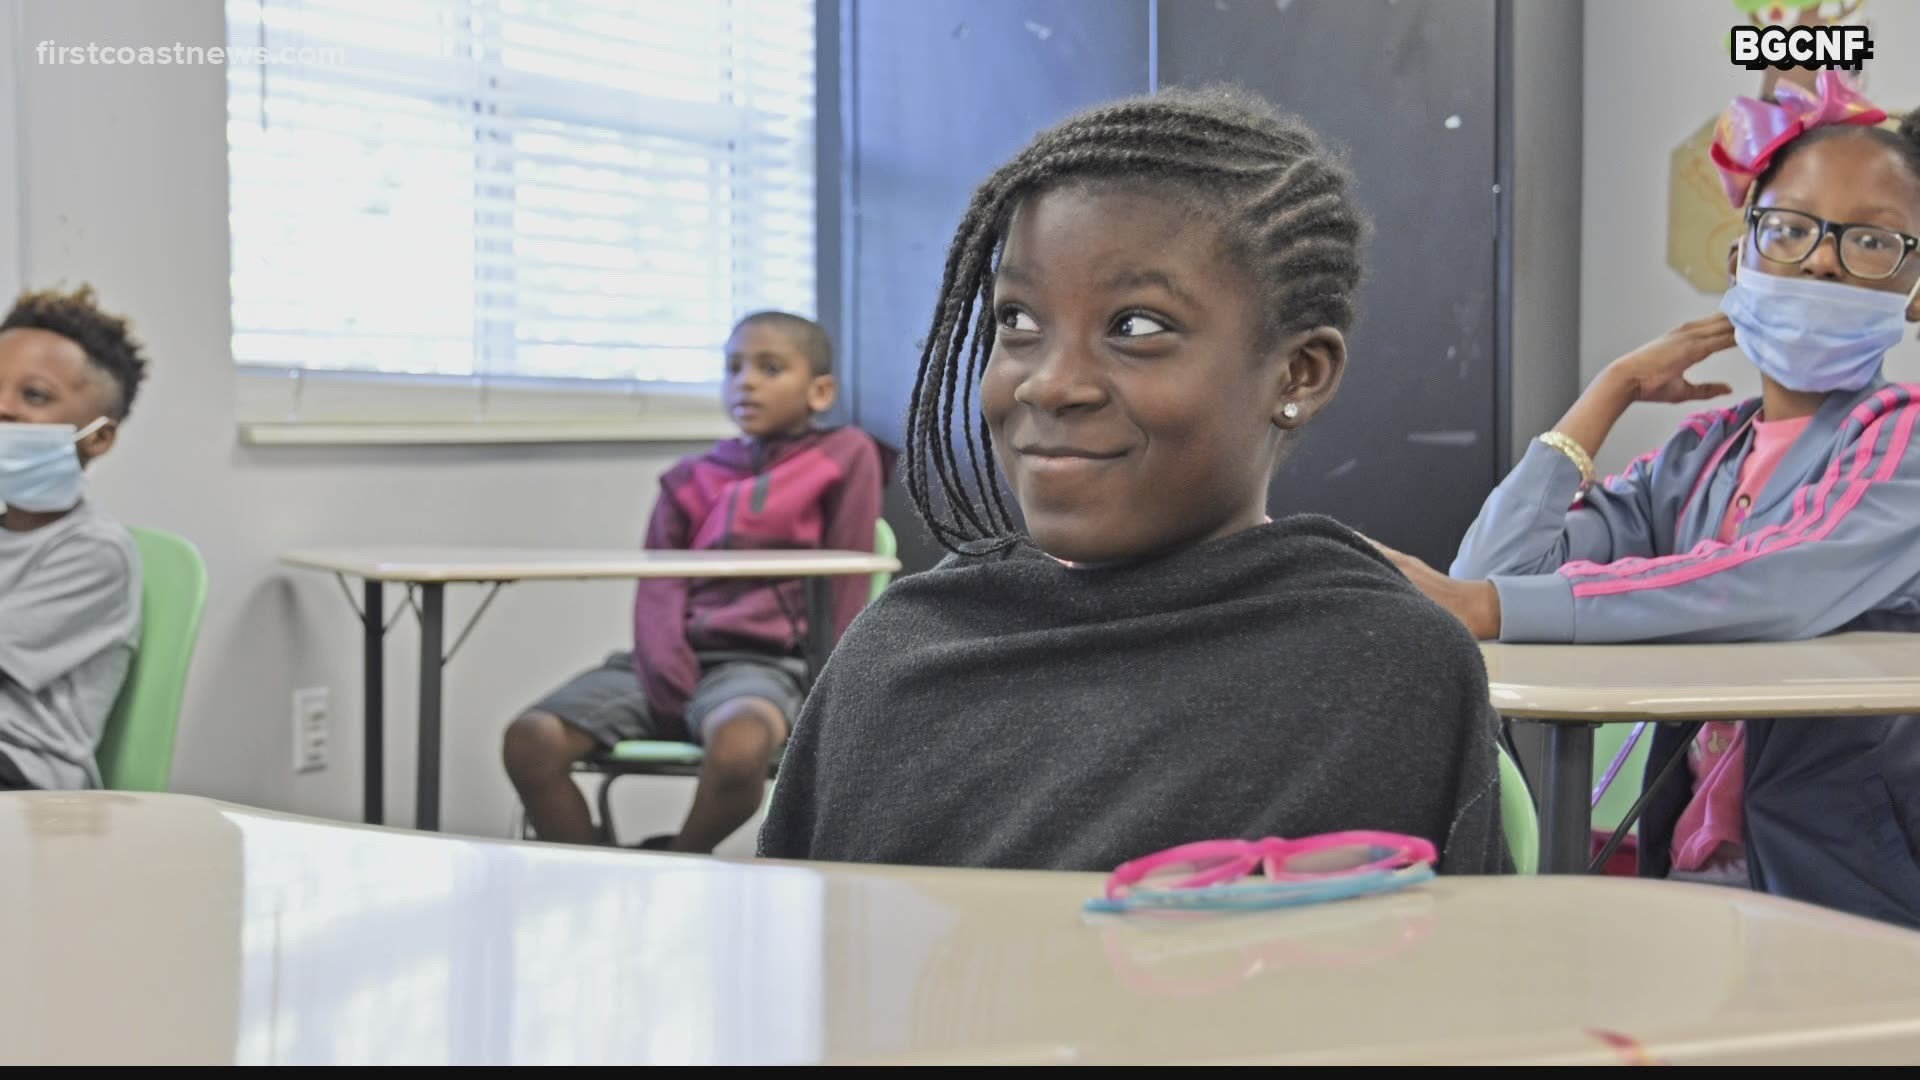 Summer camps at Boys and Girls Clubs could be seen as a trial run for what we may expect in schools.